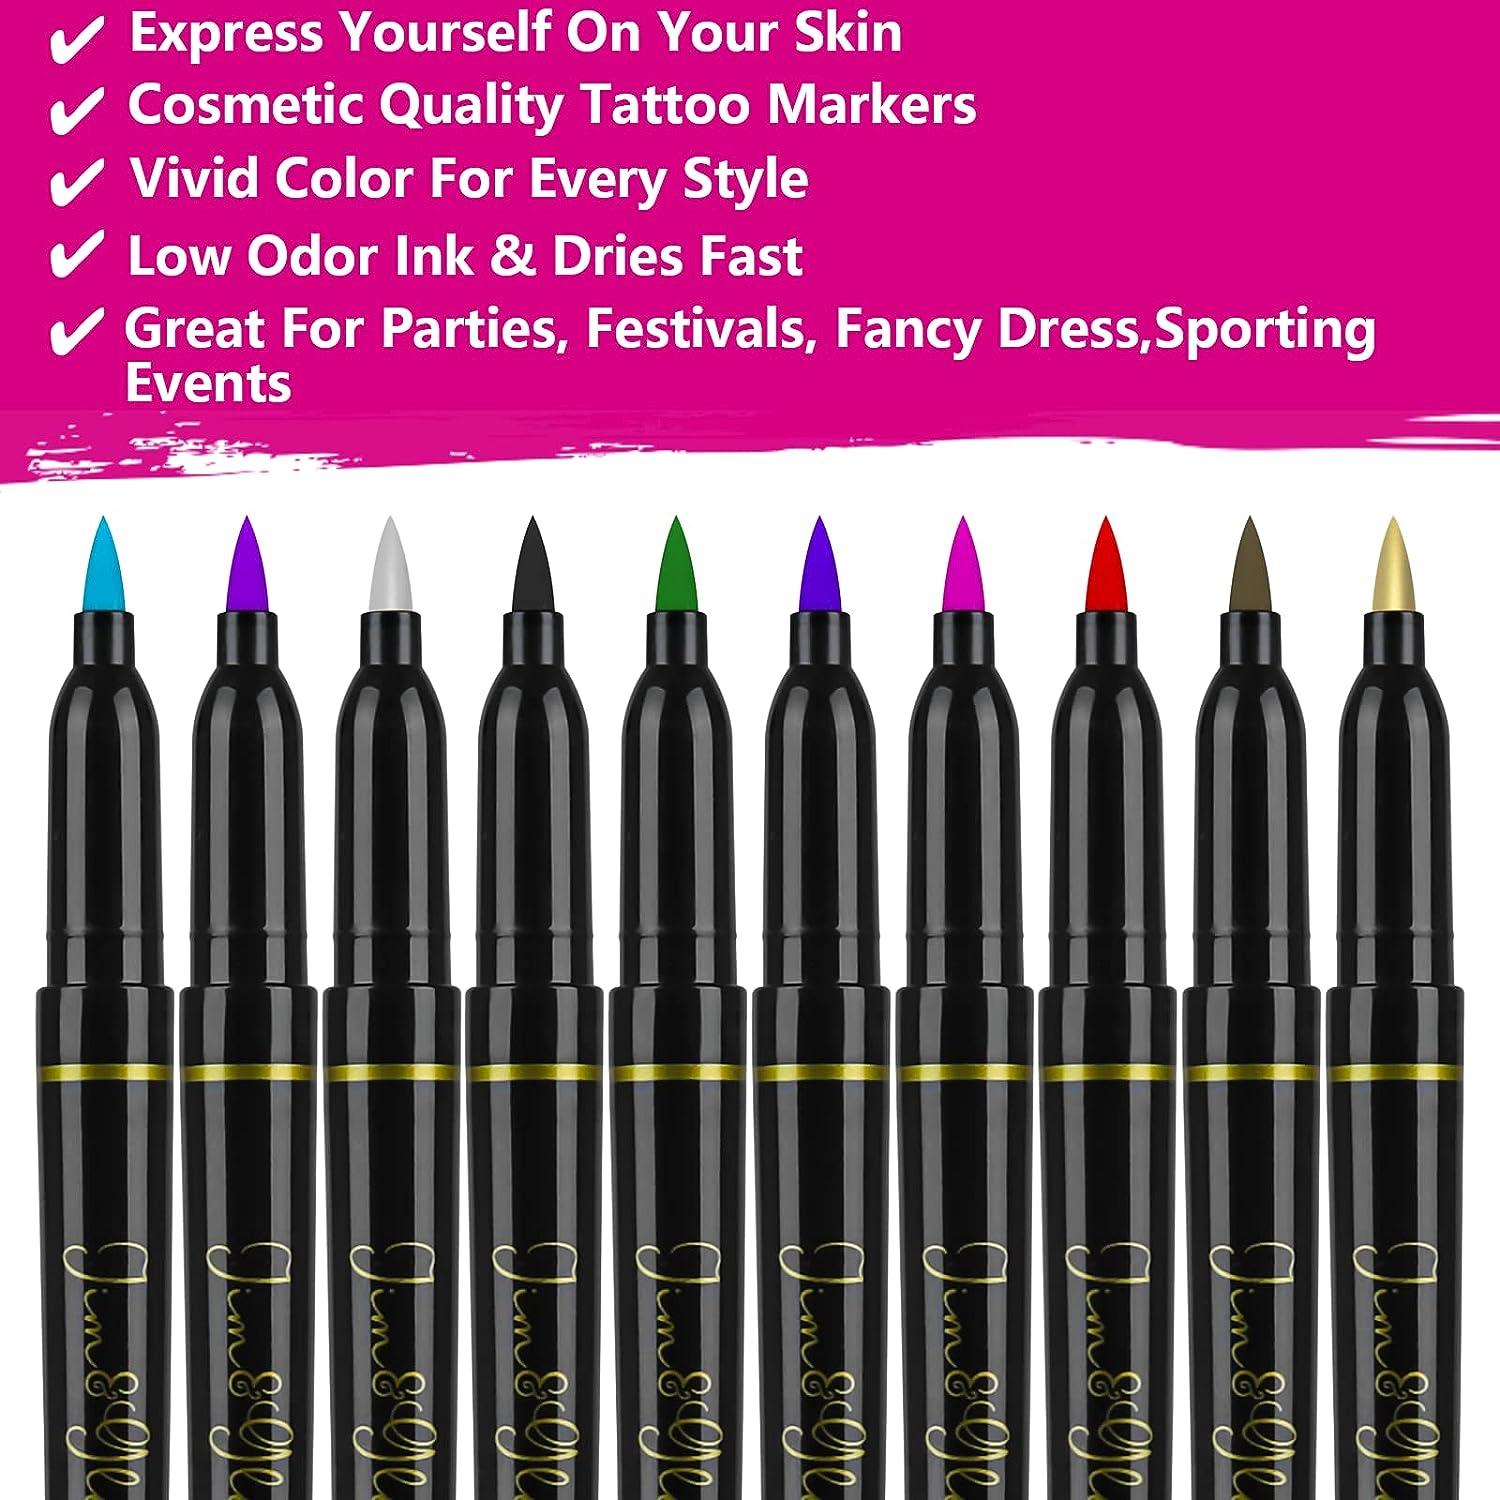 Jim&Gloria Body Art Tattoo Pen 10 Colors With Gold and Silver Fake Tattoos  Brush Temporary Tattoo Kit Teen Girls Trendy Stuff for Birthday  Friendsgiving Thanksgiving and Christmas gift ideas